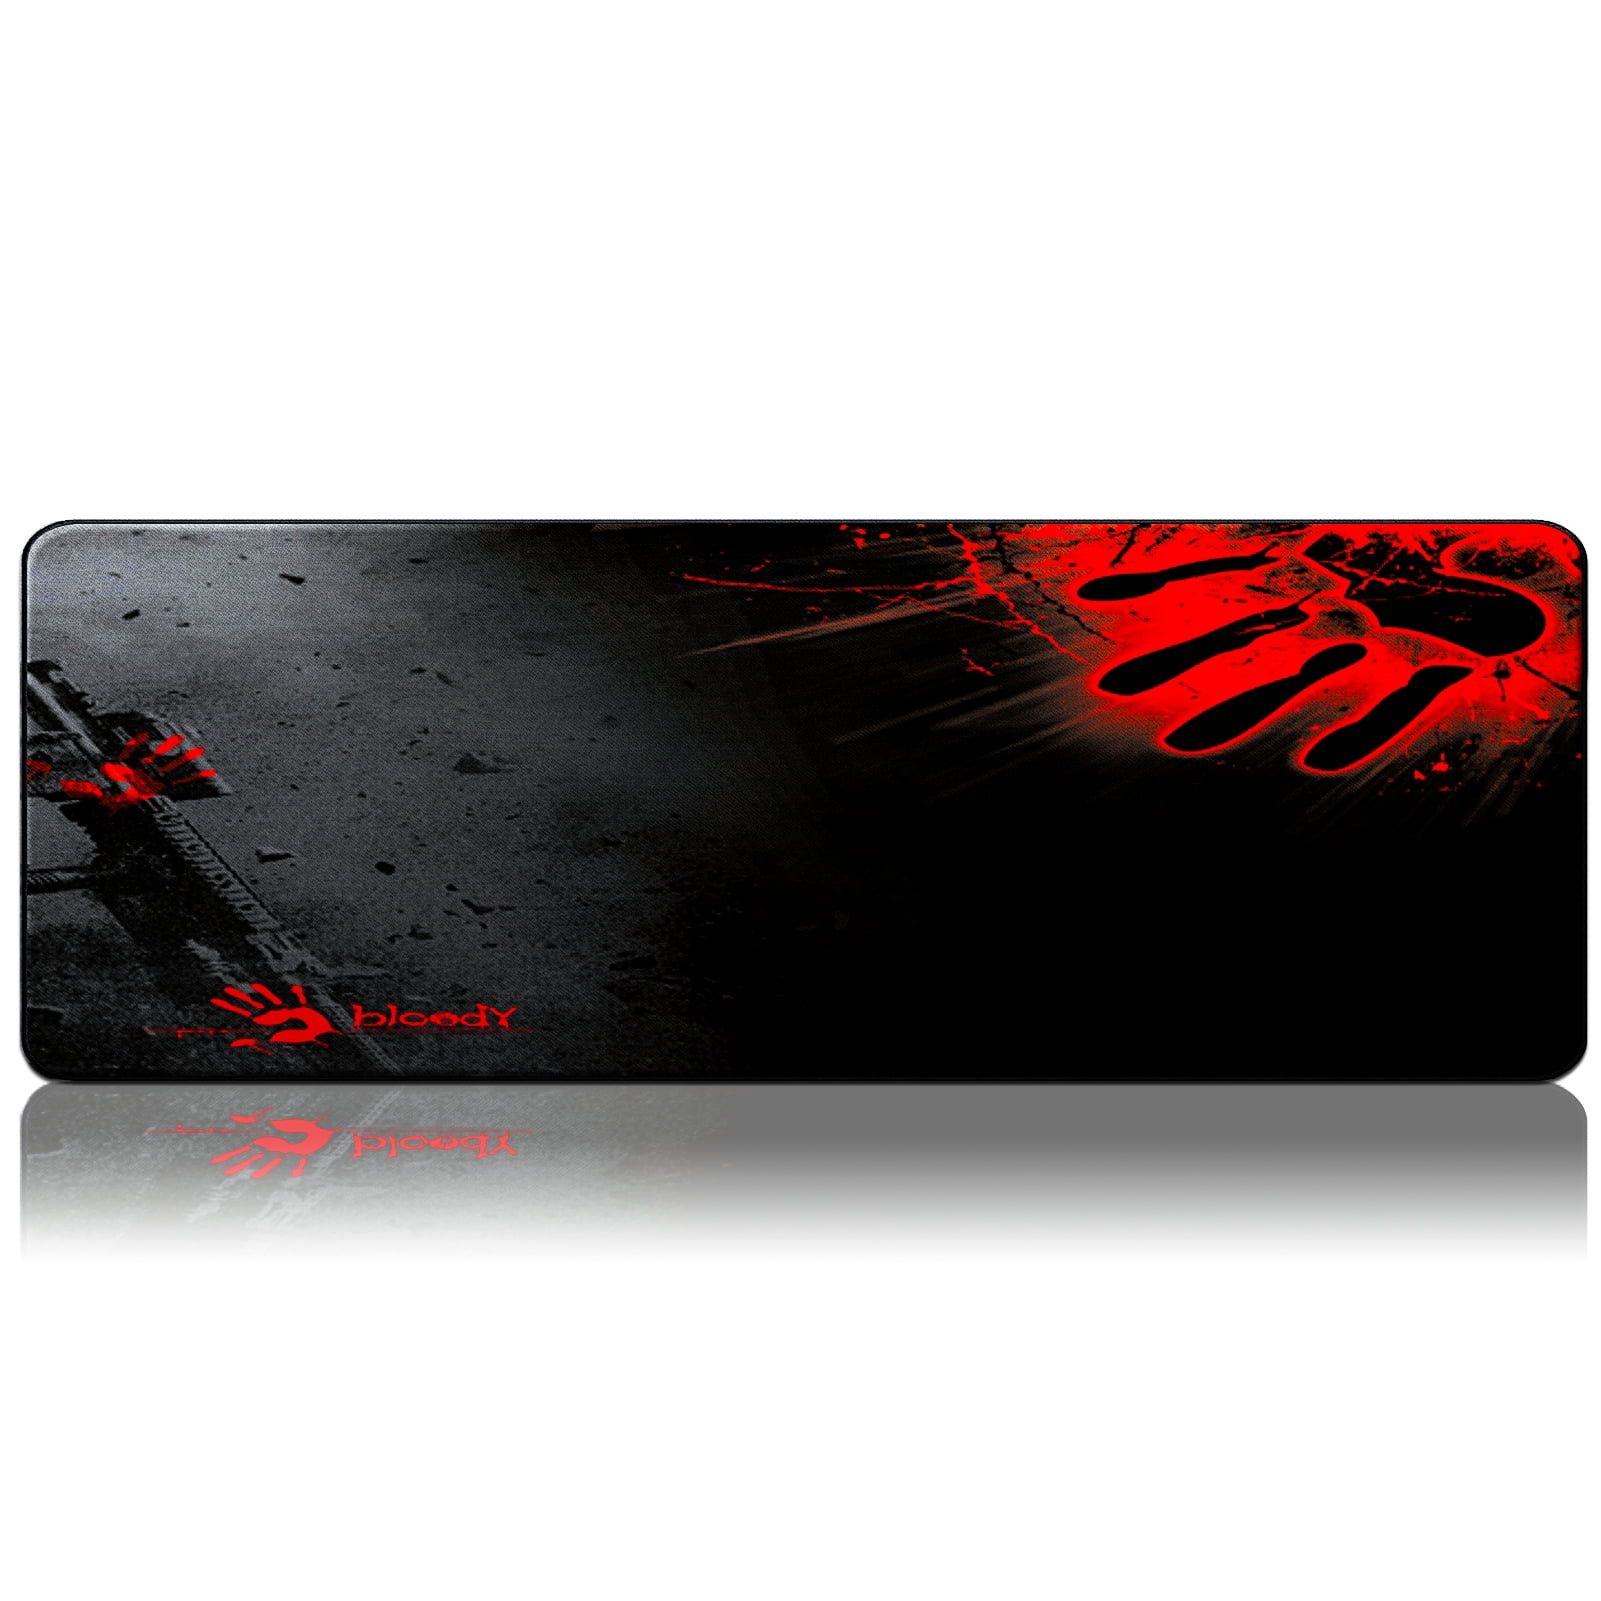 Mouse Pad top Quality Comfortable Mousepad computer gaming by ktrio rubber bas 